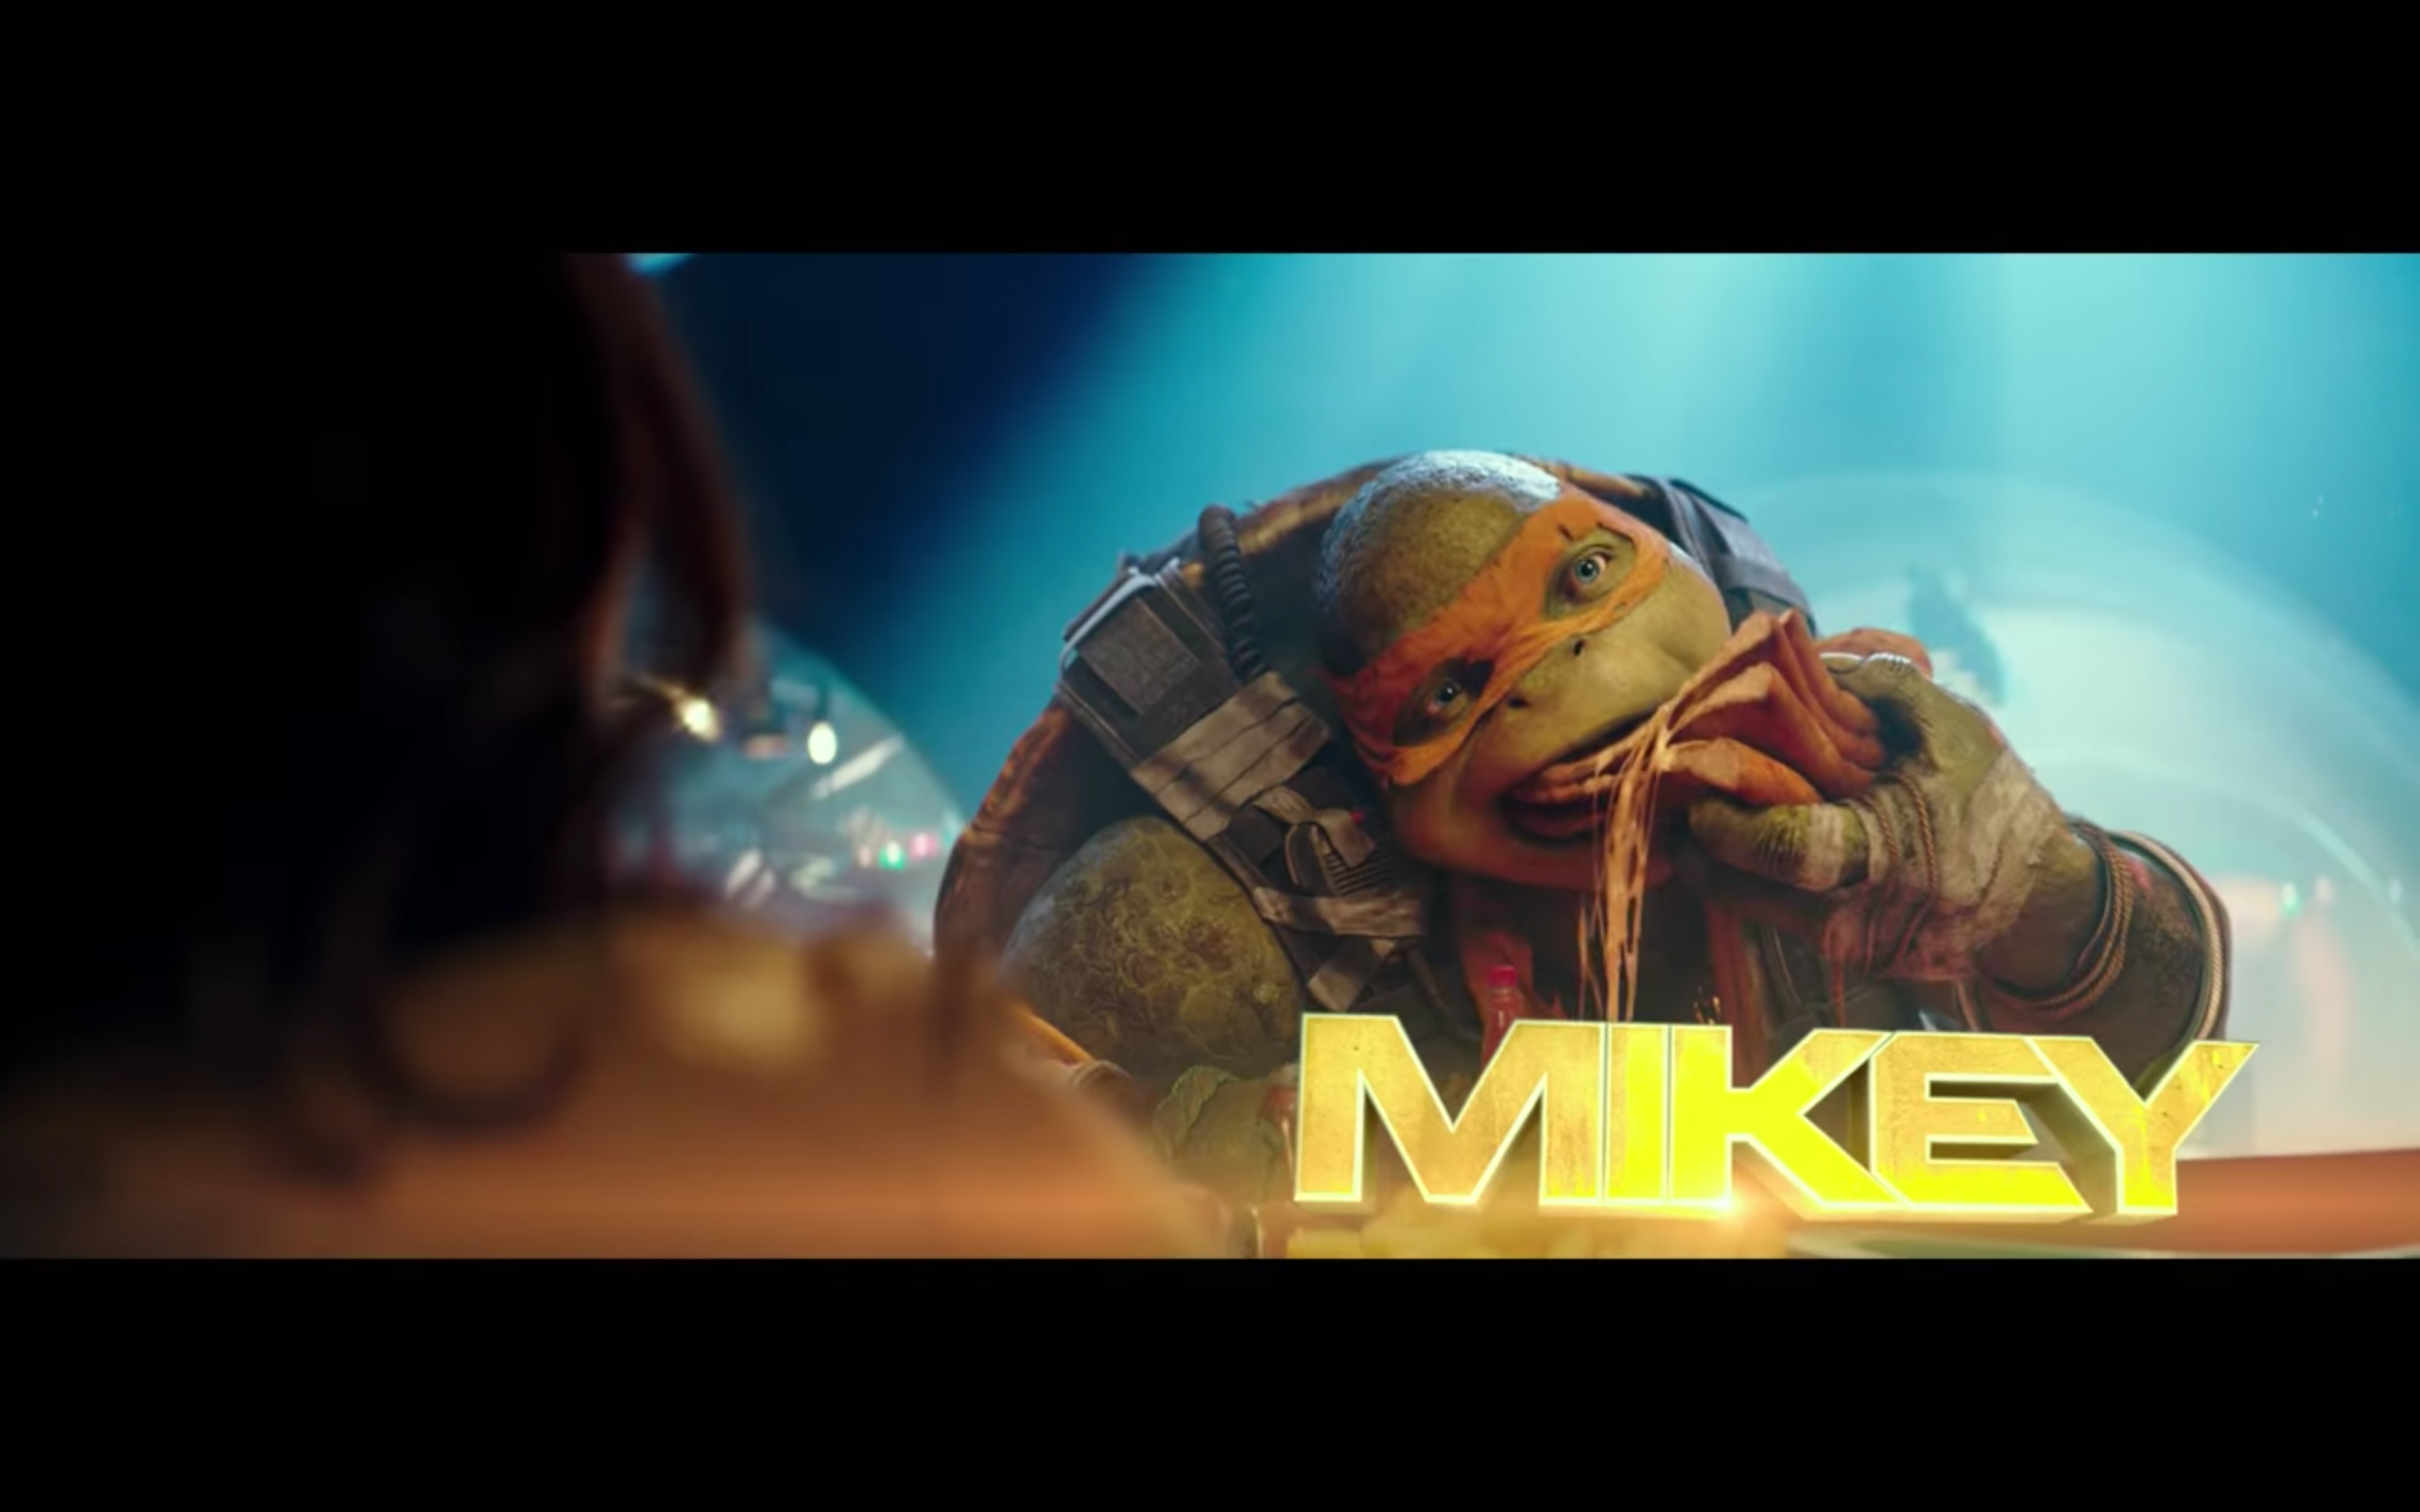 Mikey Eating Pizza Screen Shot 2016 - TEENAGE MUTANT NINJA TURTLES: OUT OF THE SHADOWS